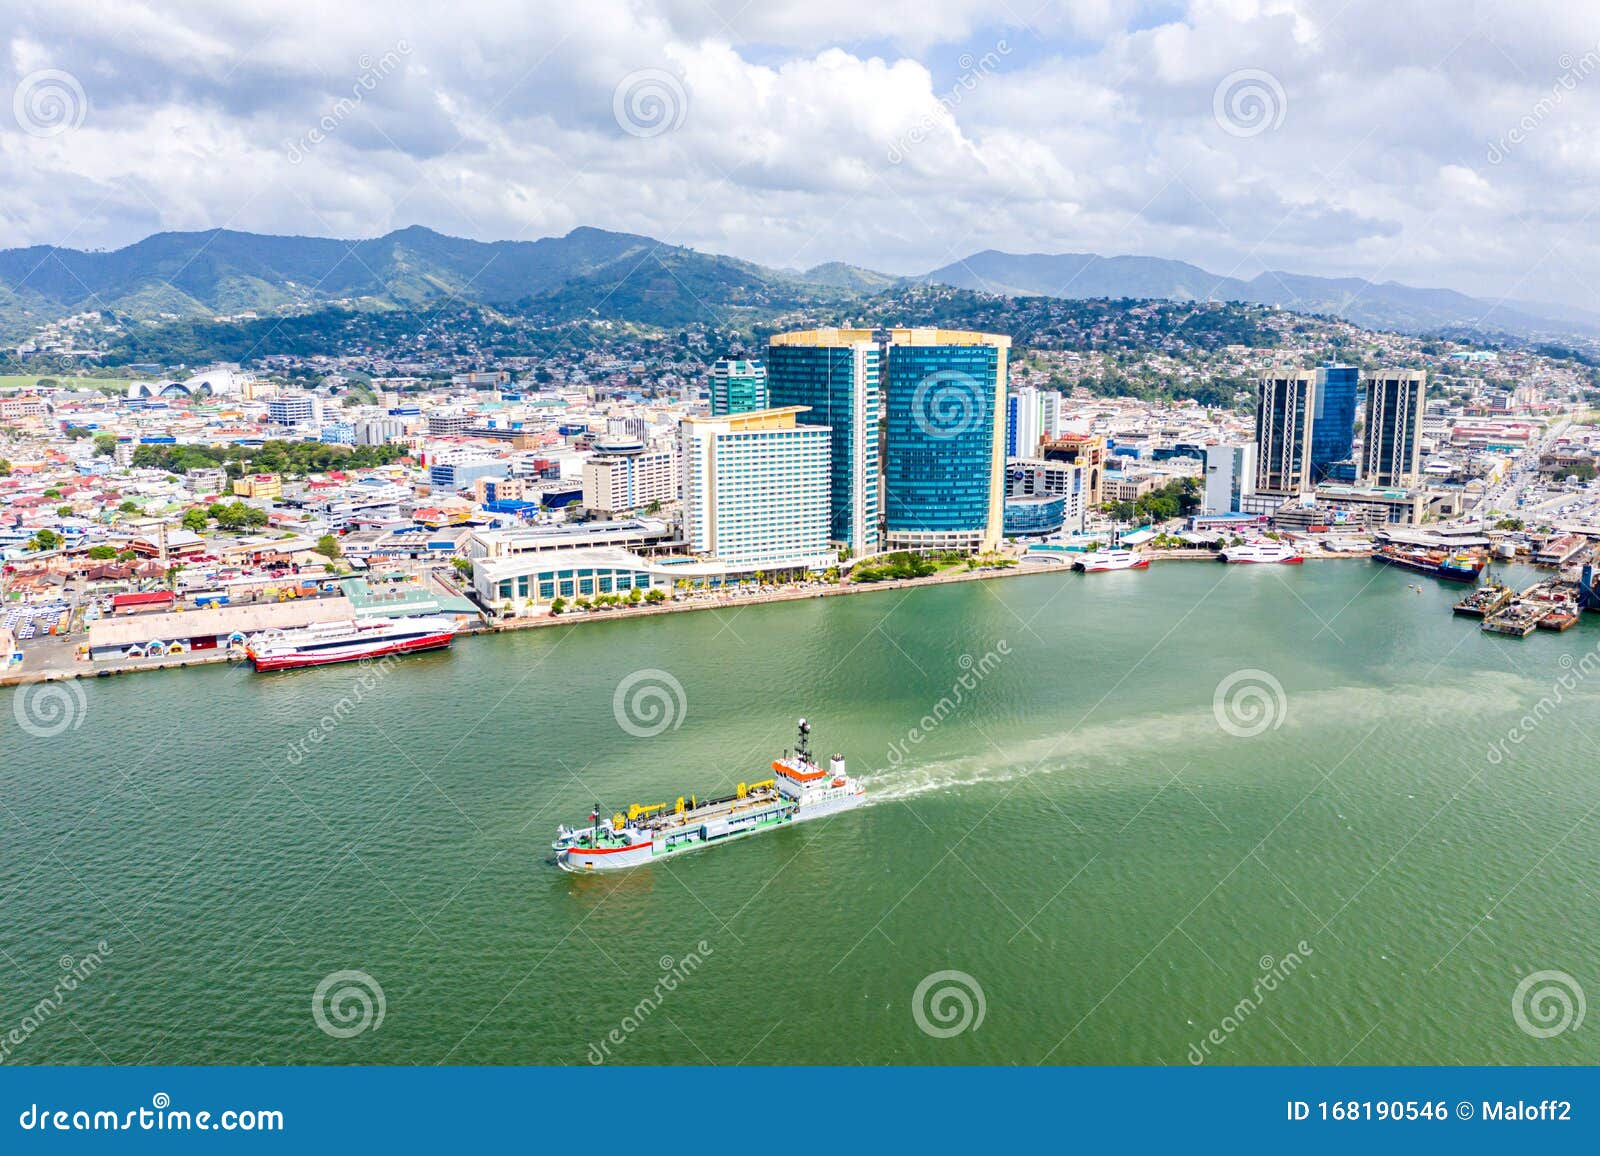 aerial view of city of port of spain, the capital city of trinidad and tobago. skyscrapers of the downtown and a busy sea port